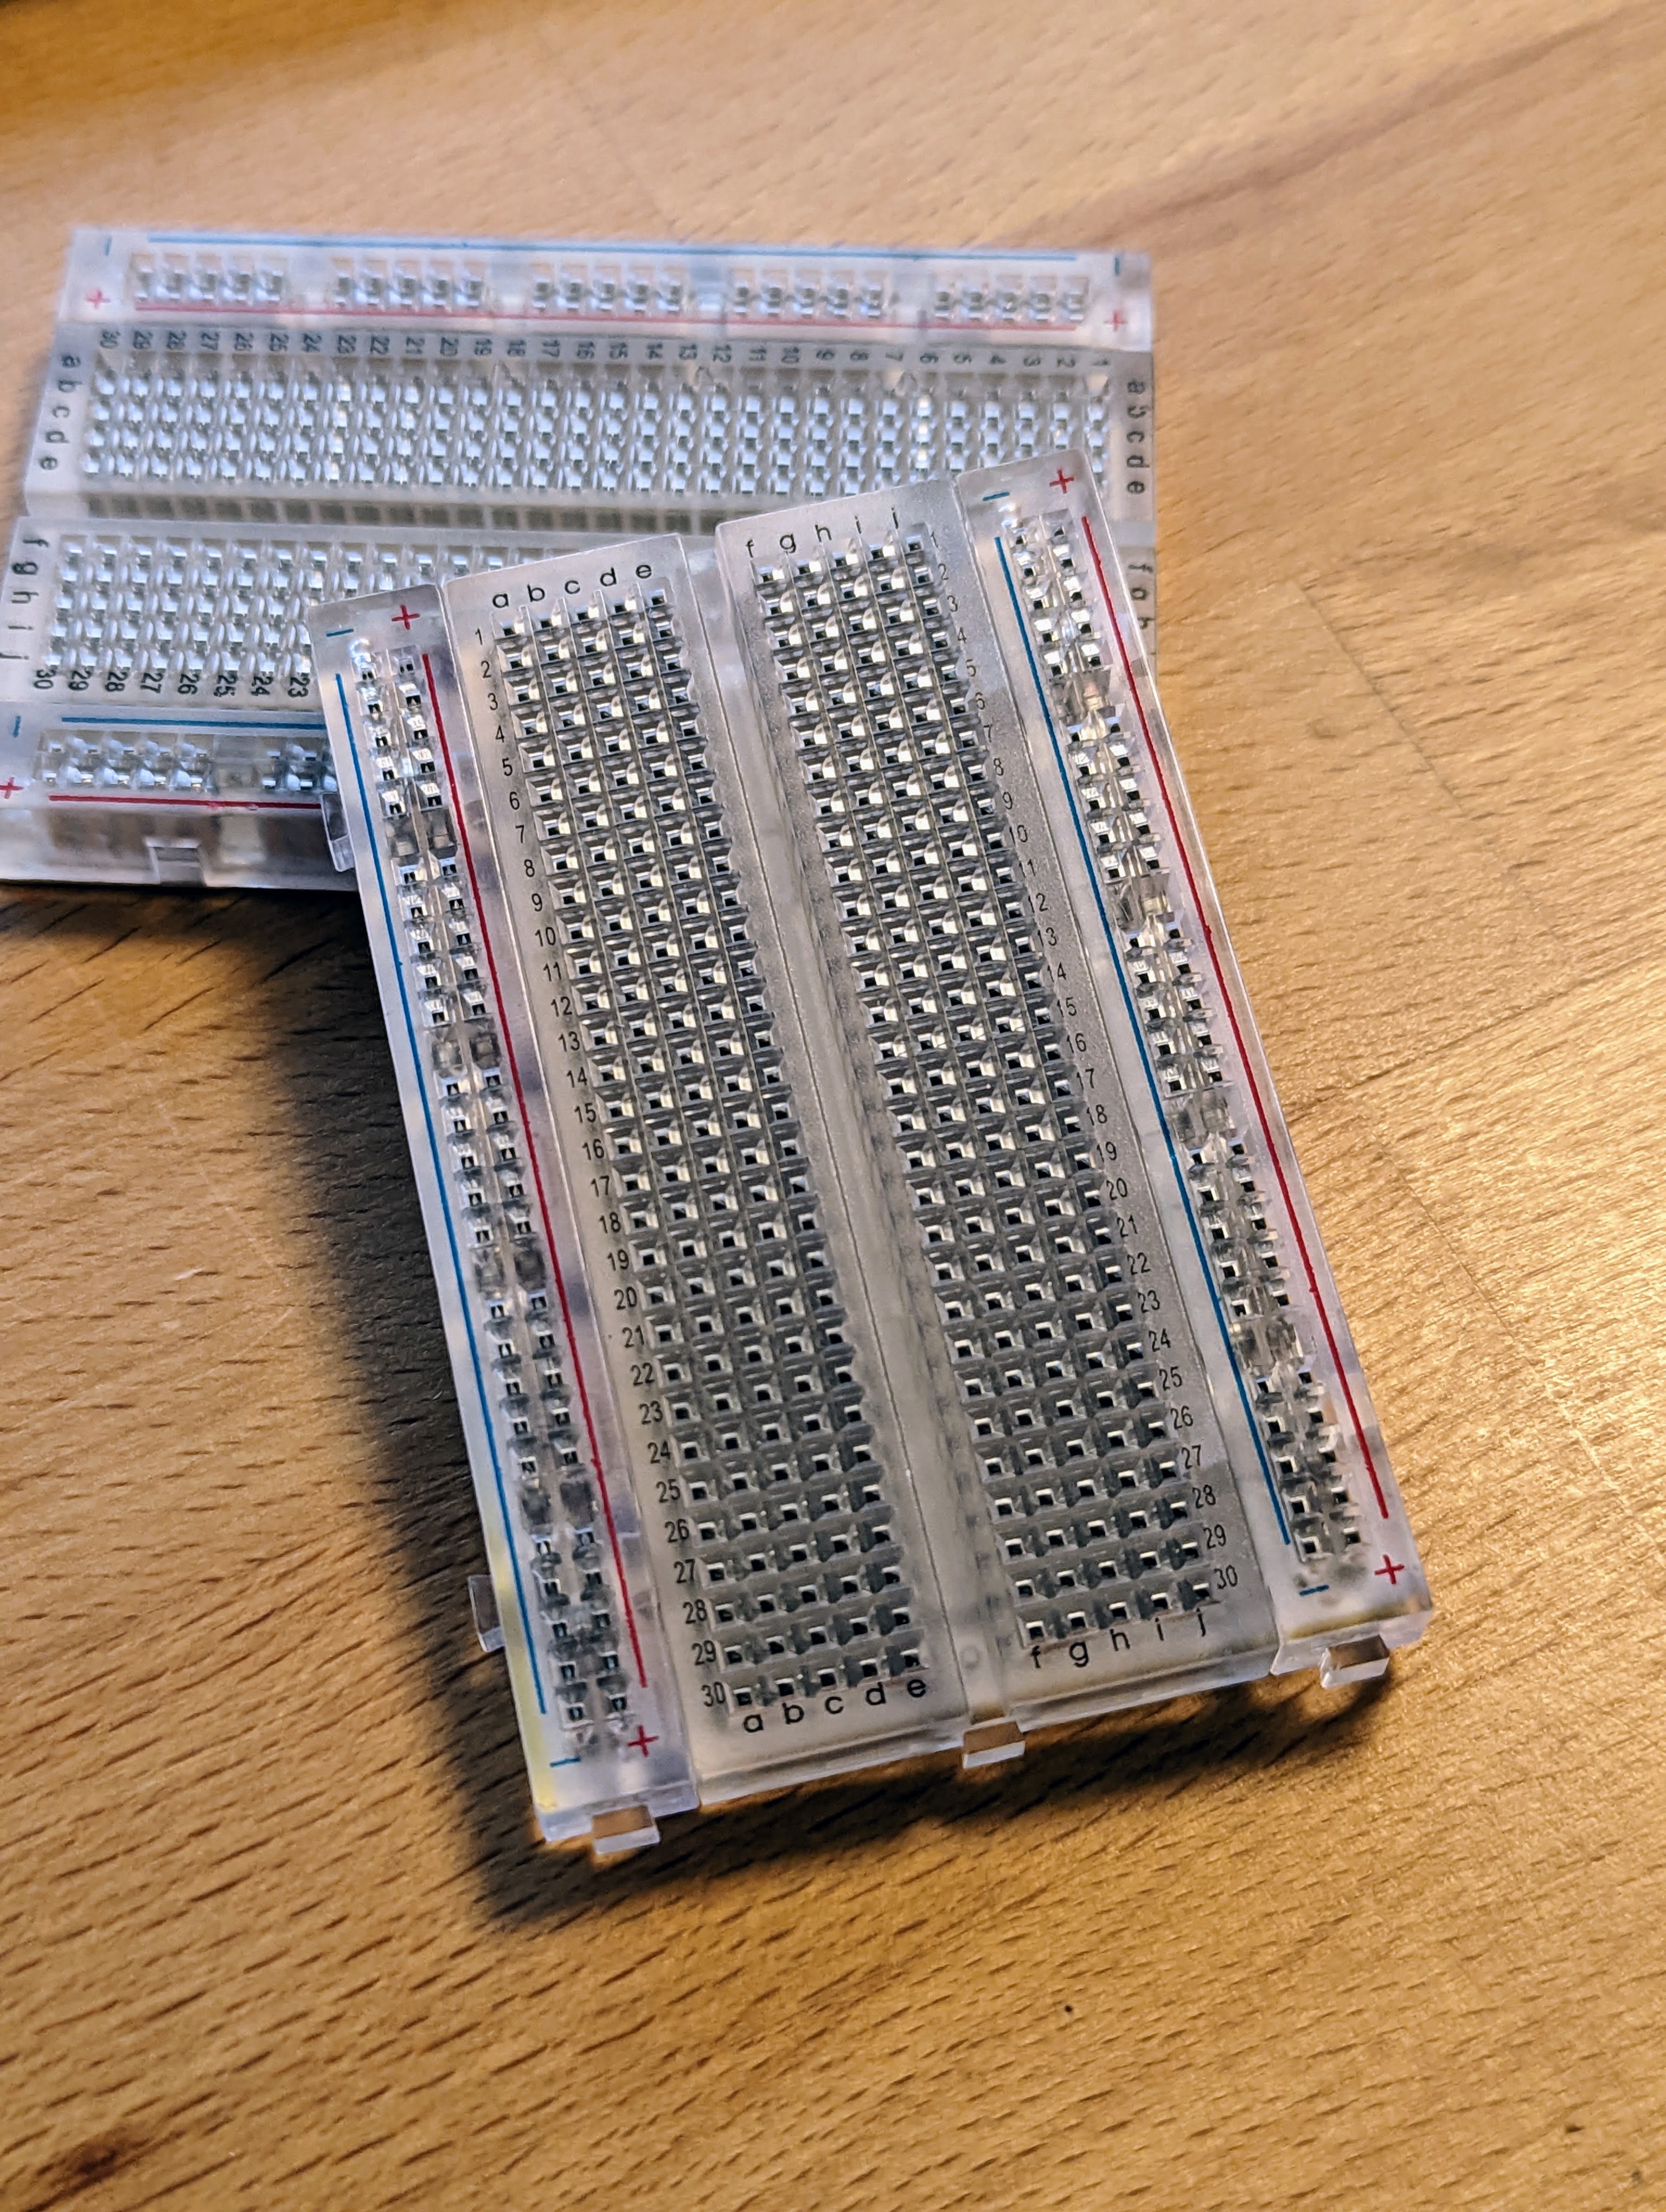 Breadboard with 400 connections - Your experimental board for your own circuits